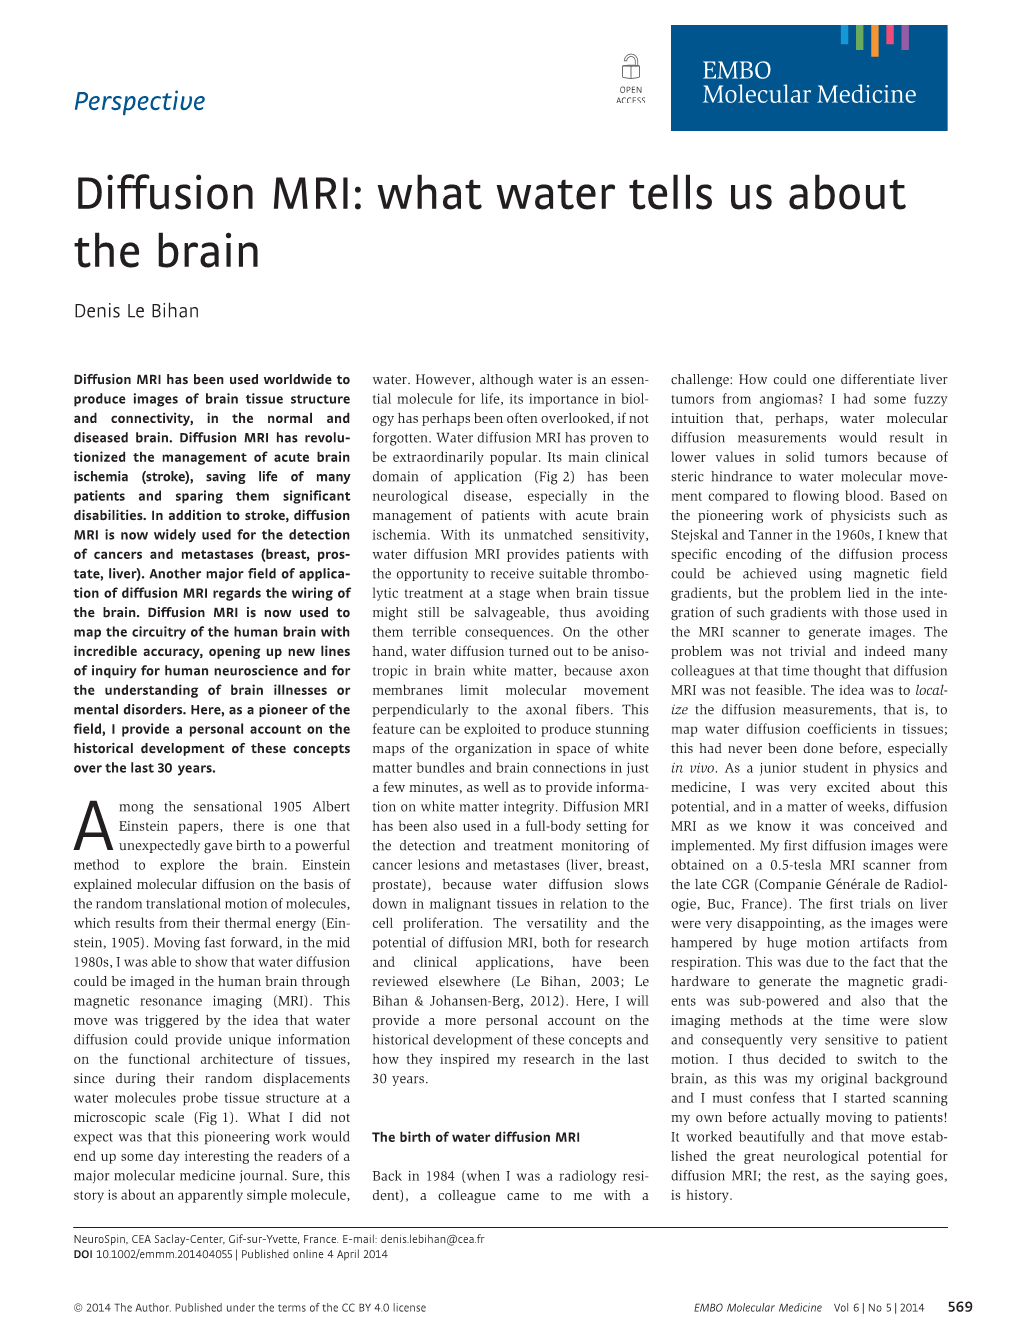 Diffusion MRI: What Water Tells Us About the Brain